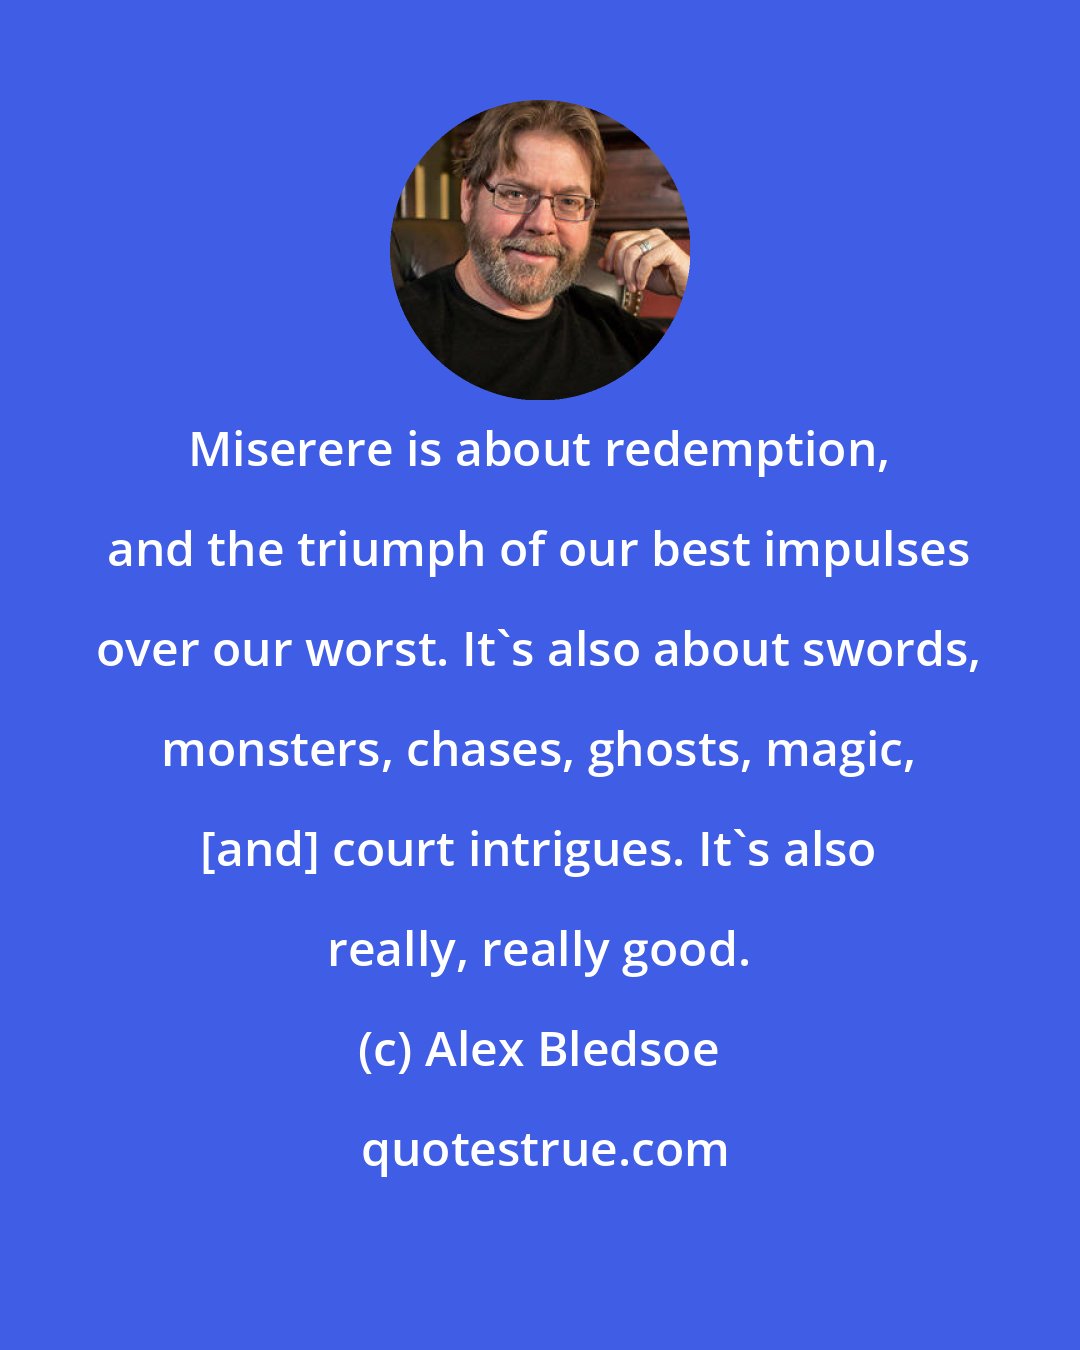 Alex Bledsoe: Miserere is about redemption, and the triumph of our best impulses over our worst. It's also about swords, monsters, chases, ghosts, magic, [and] court intrigues. It's also really, really good.